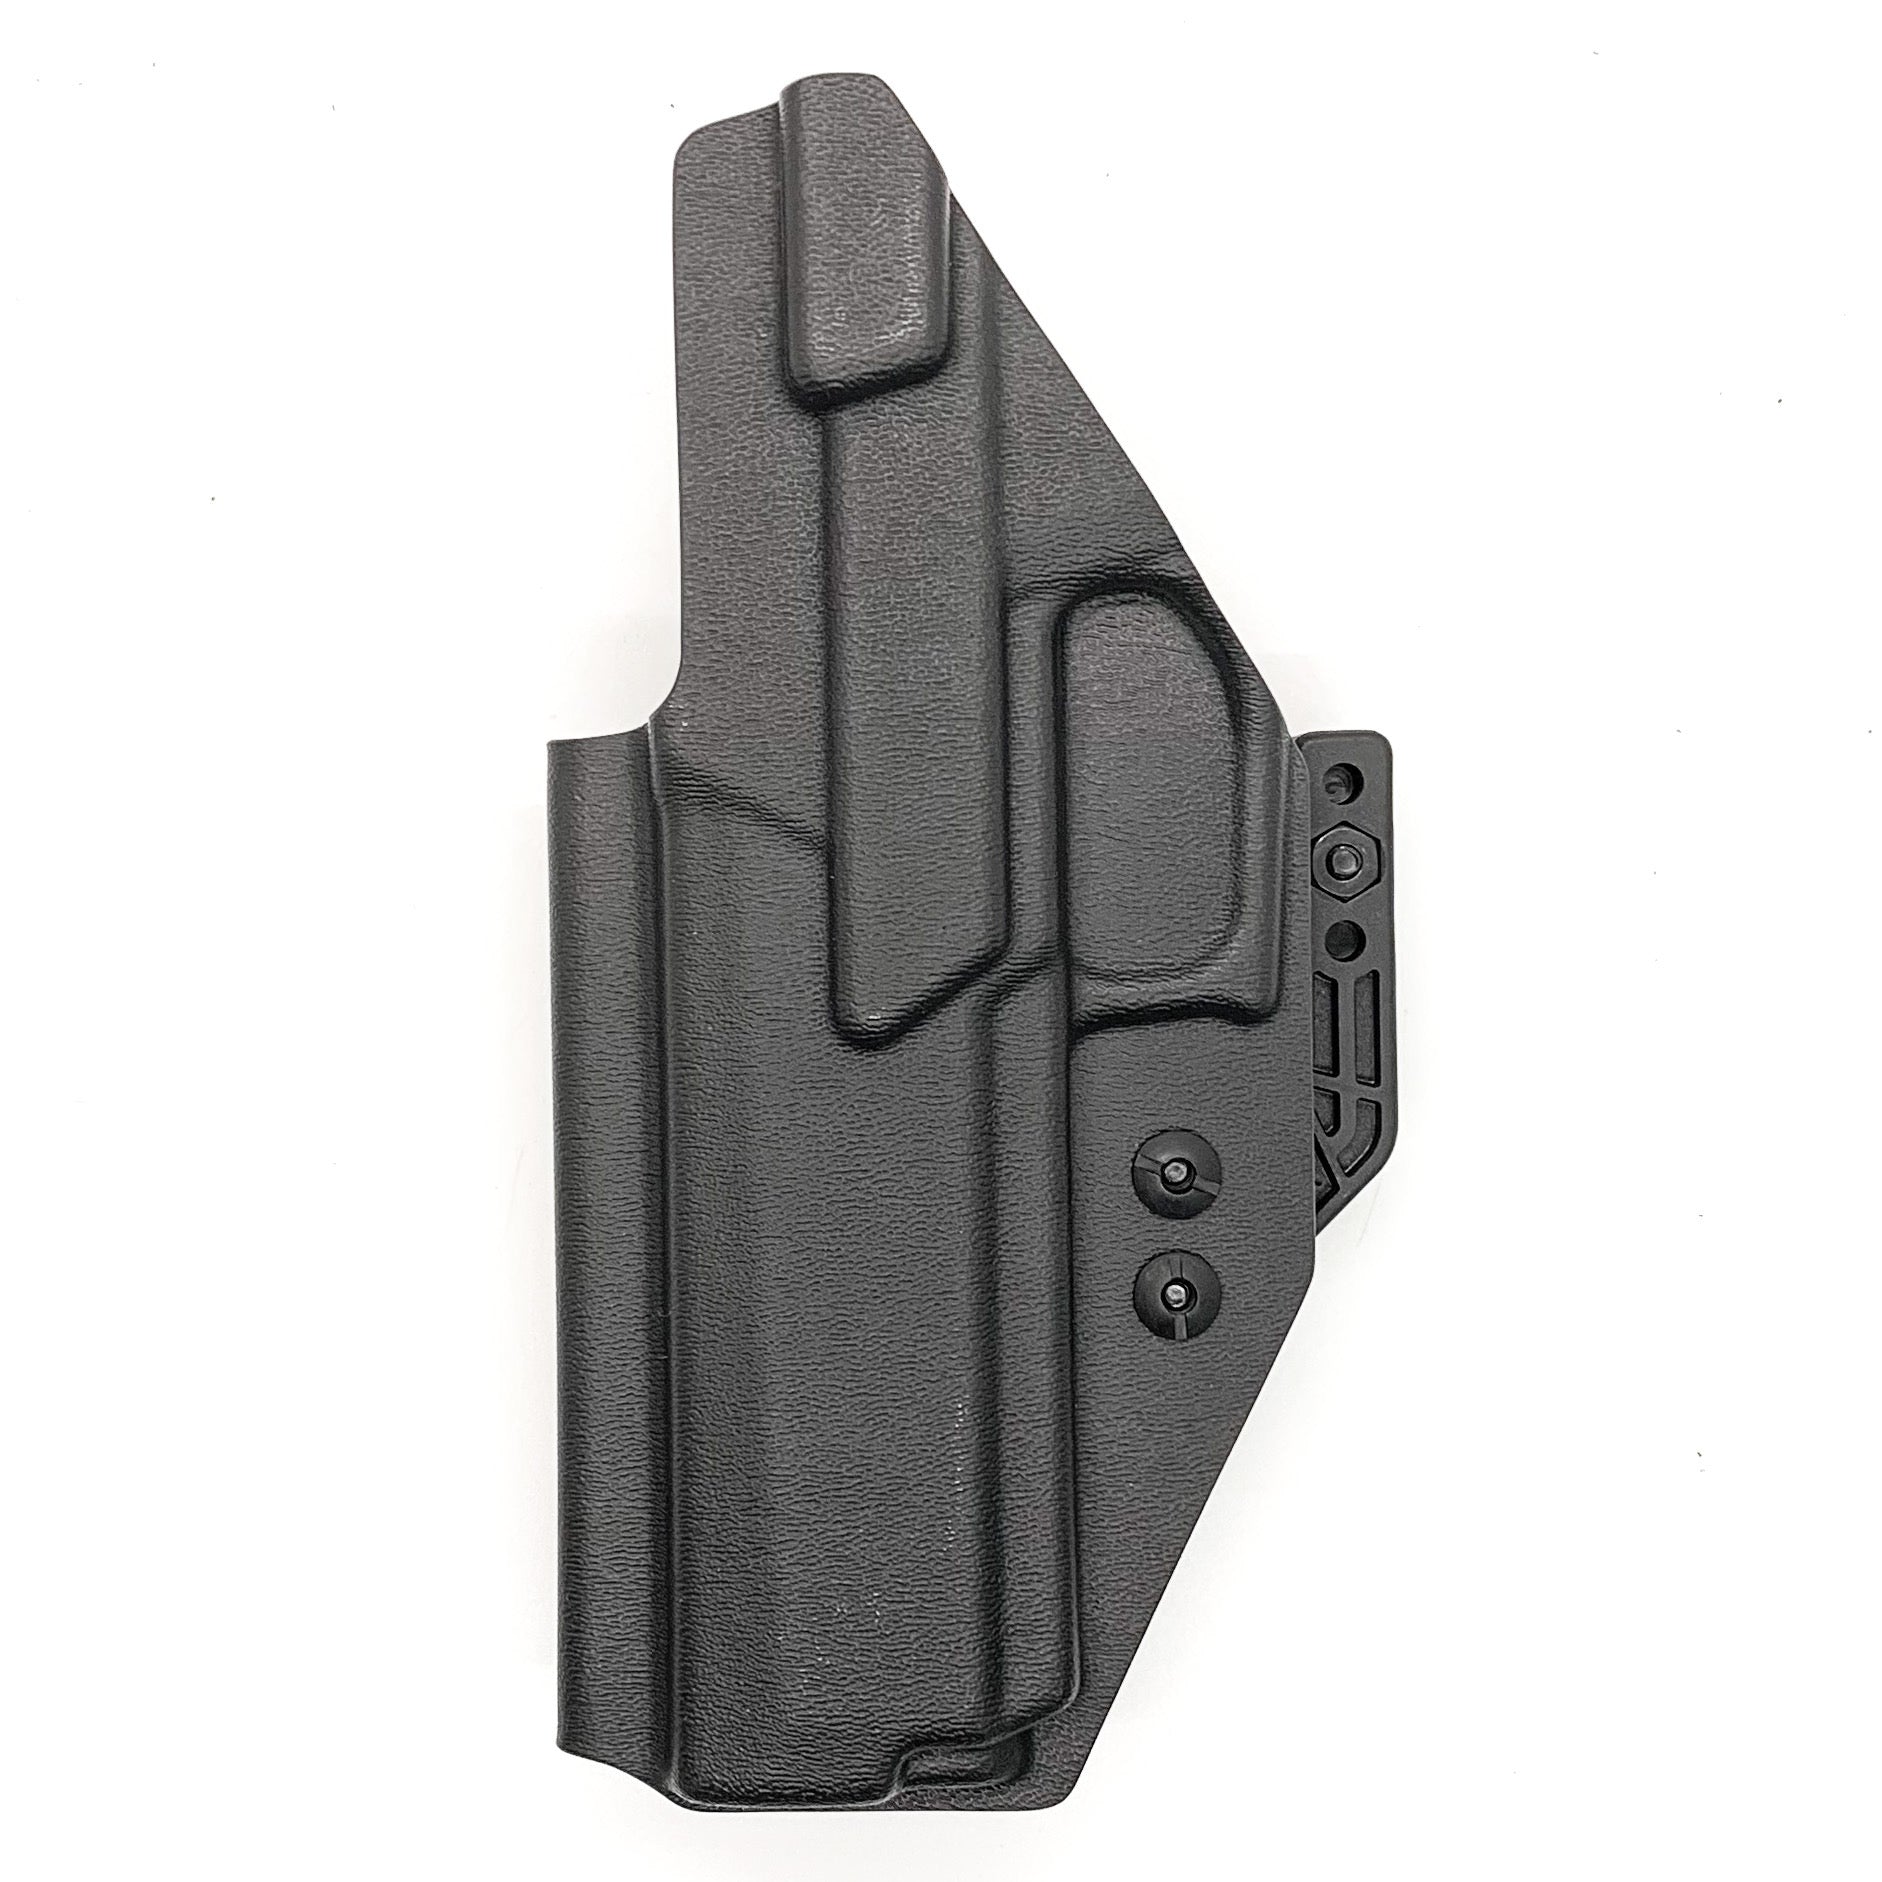 For the best inside Waistband Kydex holster designed to fit the Sig Sauer P320 X-Five Legion pistols shop Four Brothers Holsters.  Full sweatguard, adjustable retention, adjustable ride height, and cant.  Minimal material and smooth edges reduce printing and fit most red dot sights. Proudly made in the USA.  XFive X5